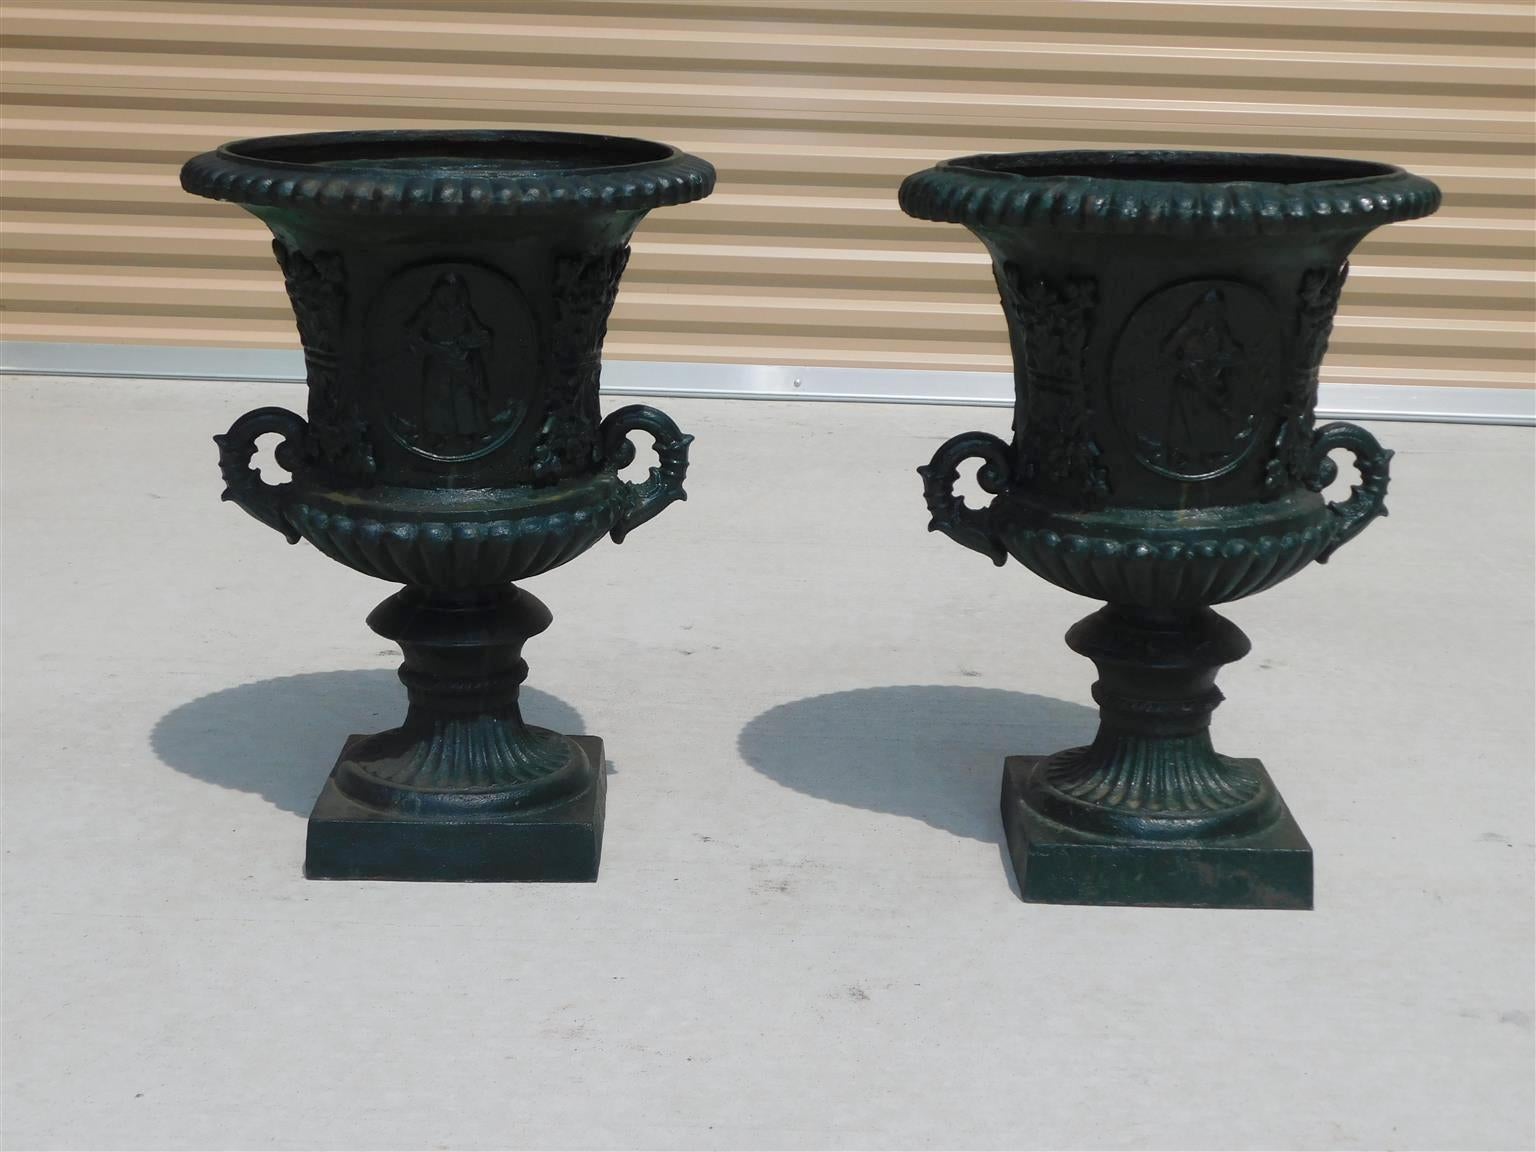 Pair of American Classical figural and foliage painted campana form garden urns with flanking foliage side handles and resting on circular fluted squared plinths, Mid 19th Century
Pair Urn measurements: 26.25